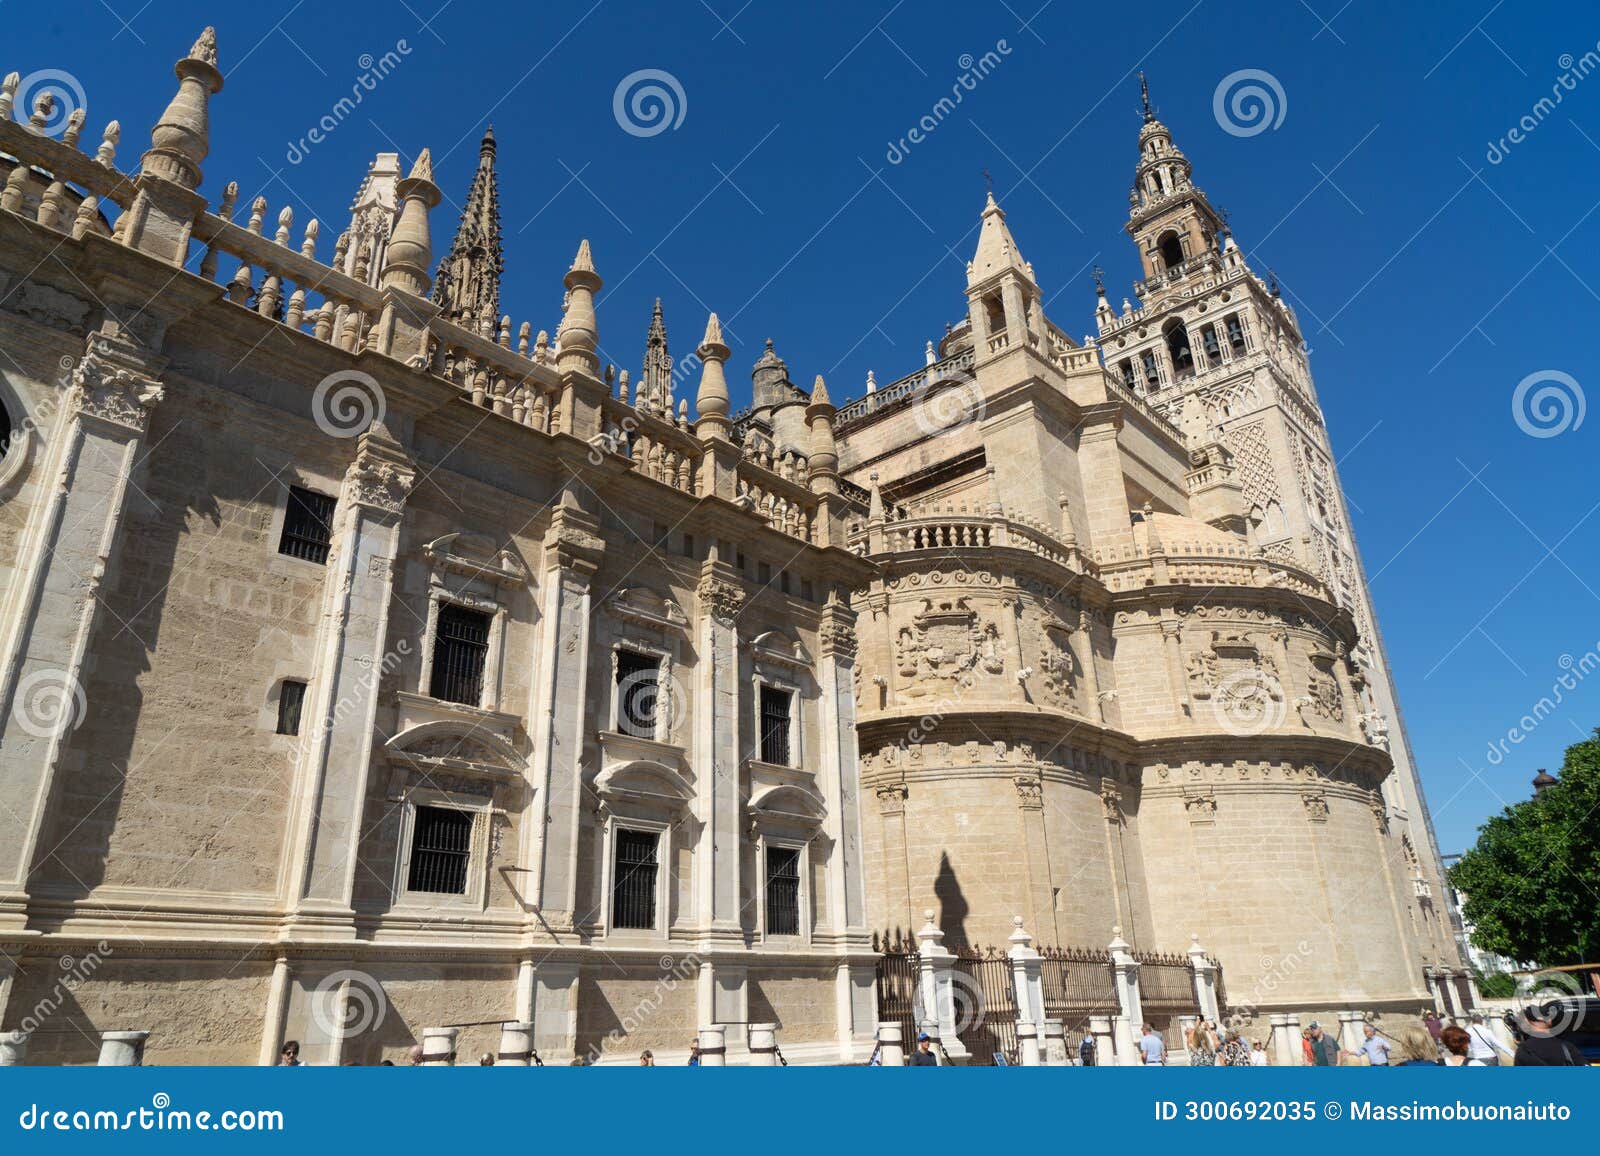 spain, seville, cathedral